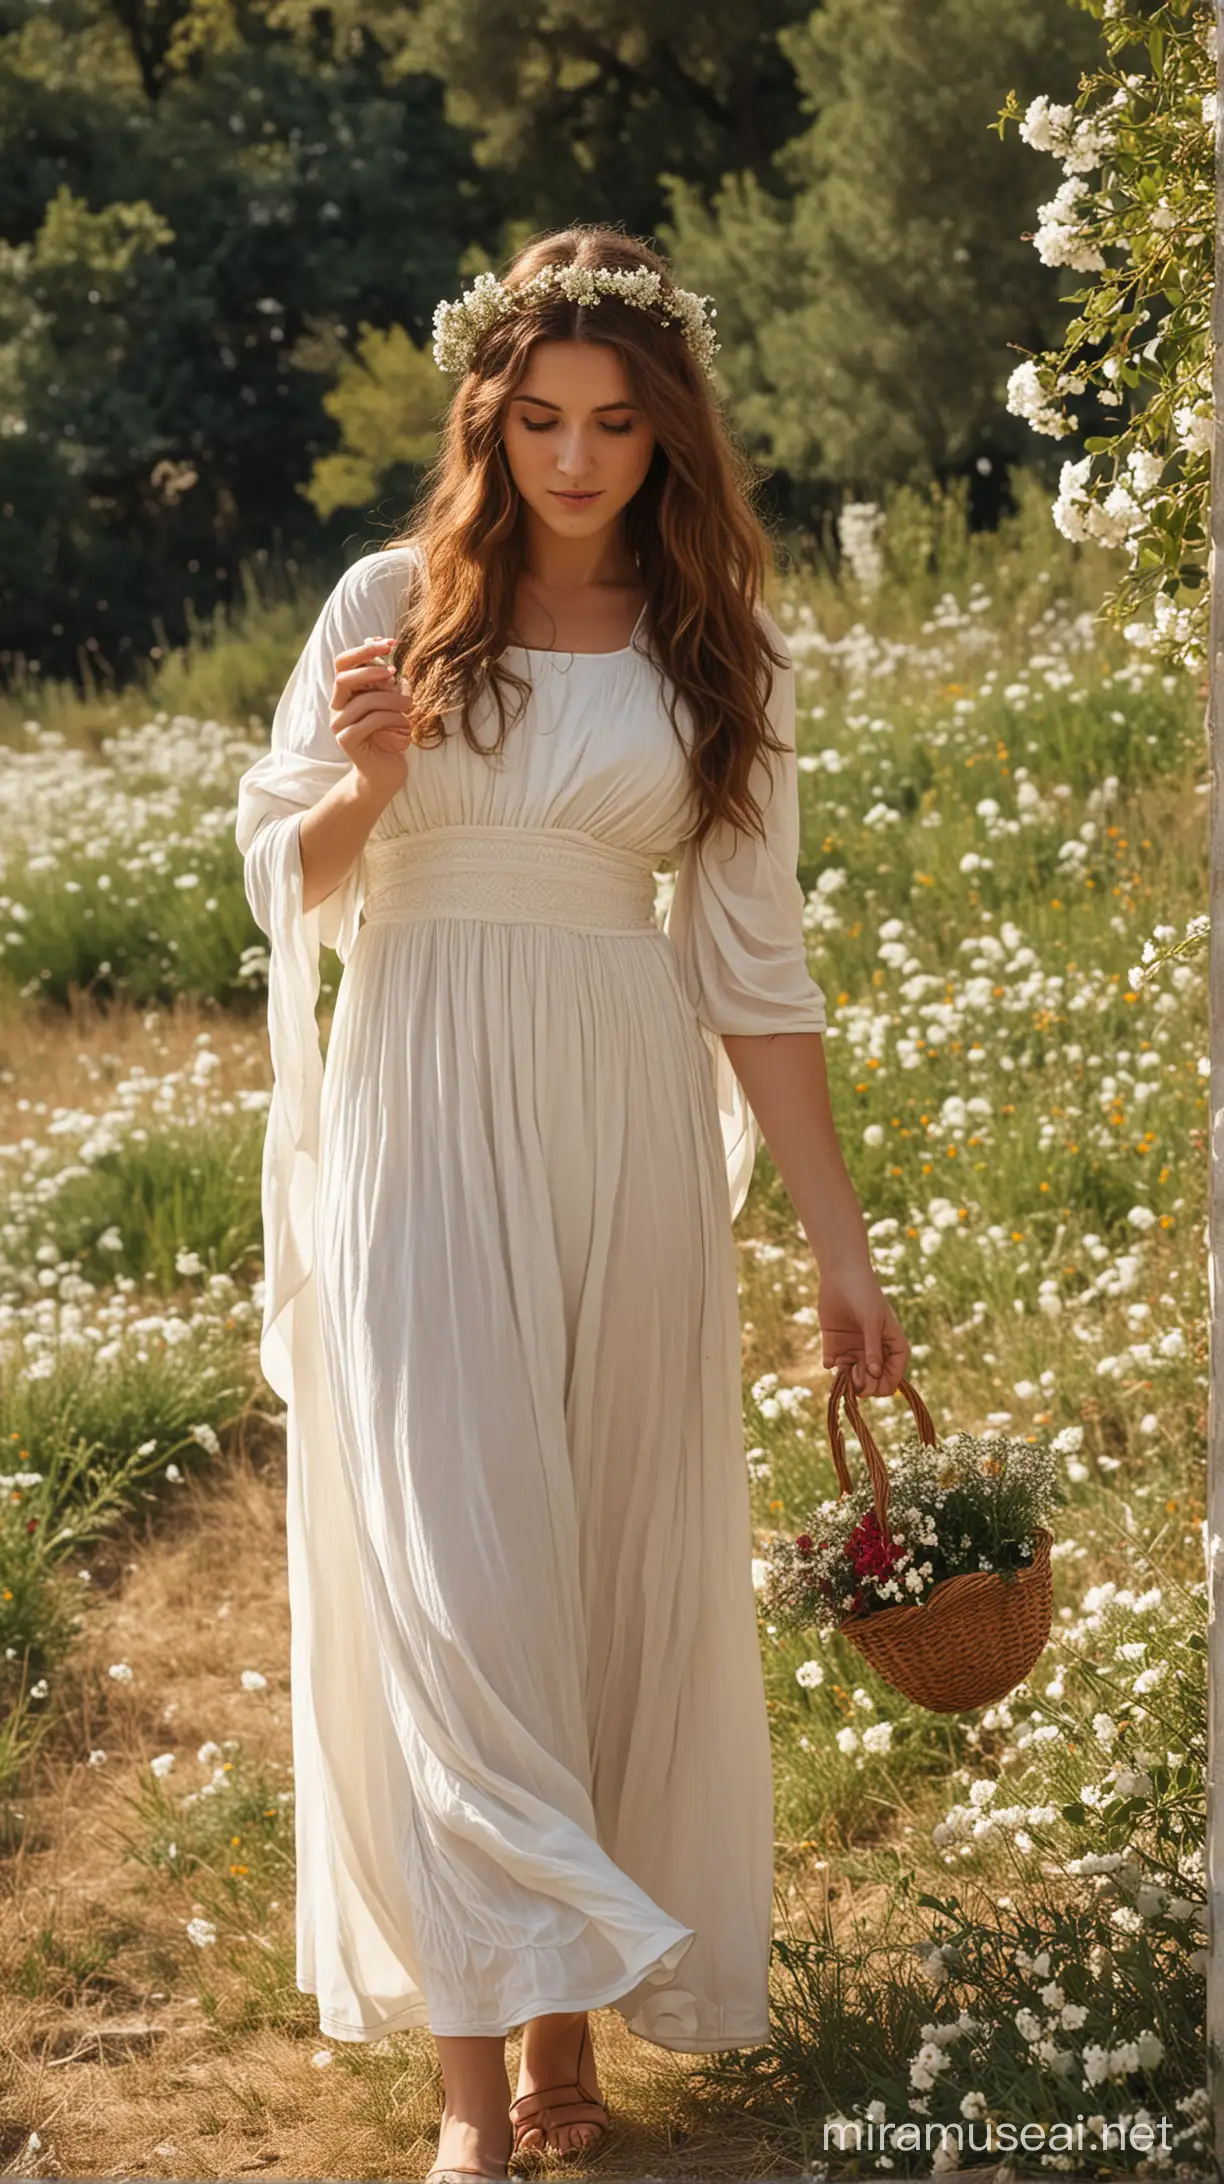 Graceful Goddess of Spring Persephone in Traditional Greek Garb with Blooming Flora